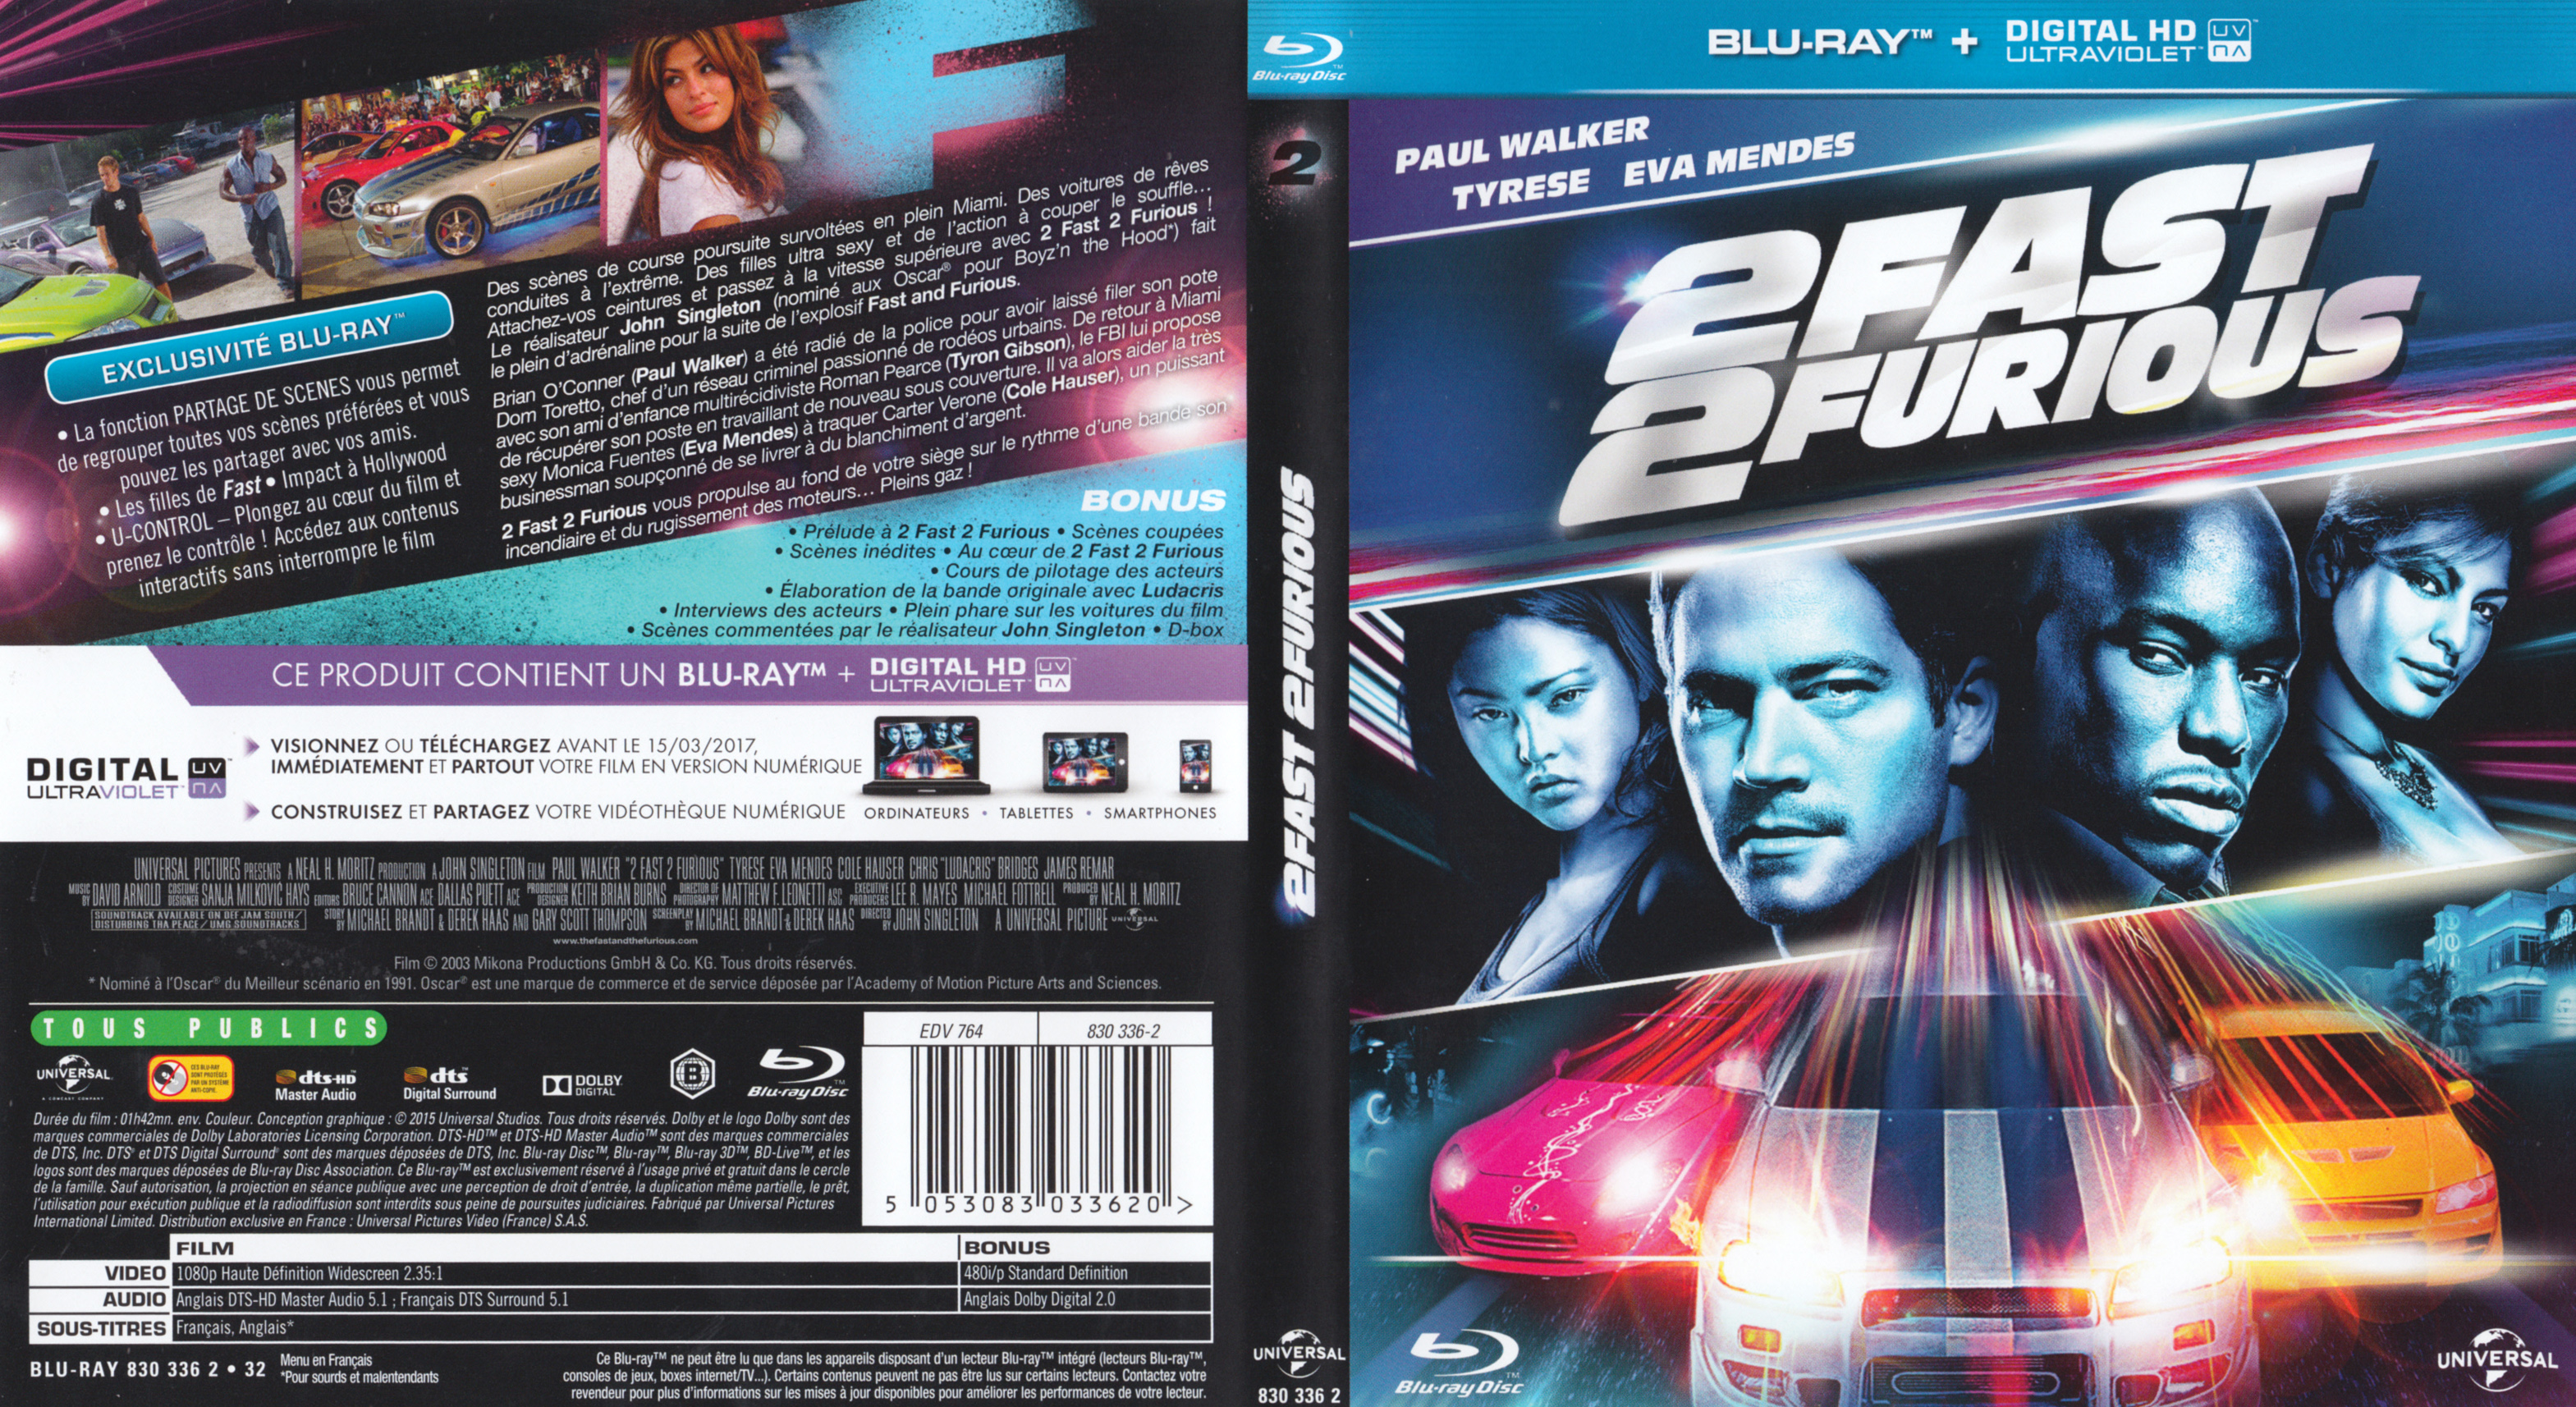 Jaquette DVD 2 fast and furious (BLU-RAY) v3